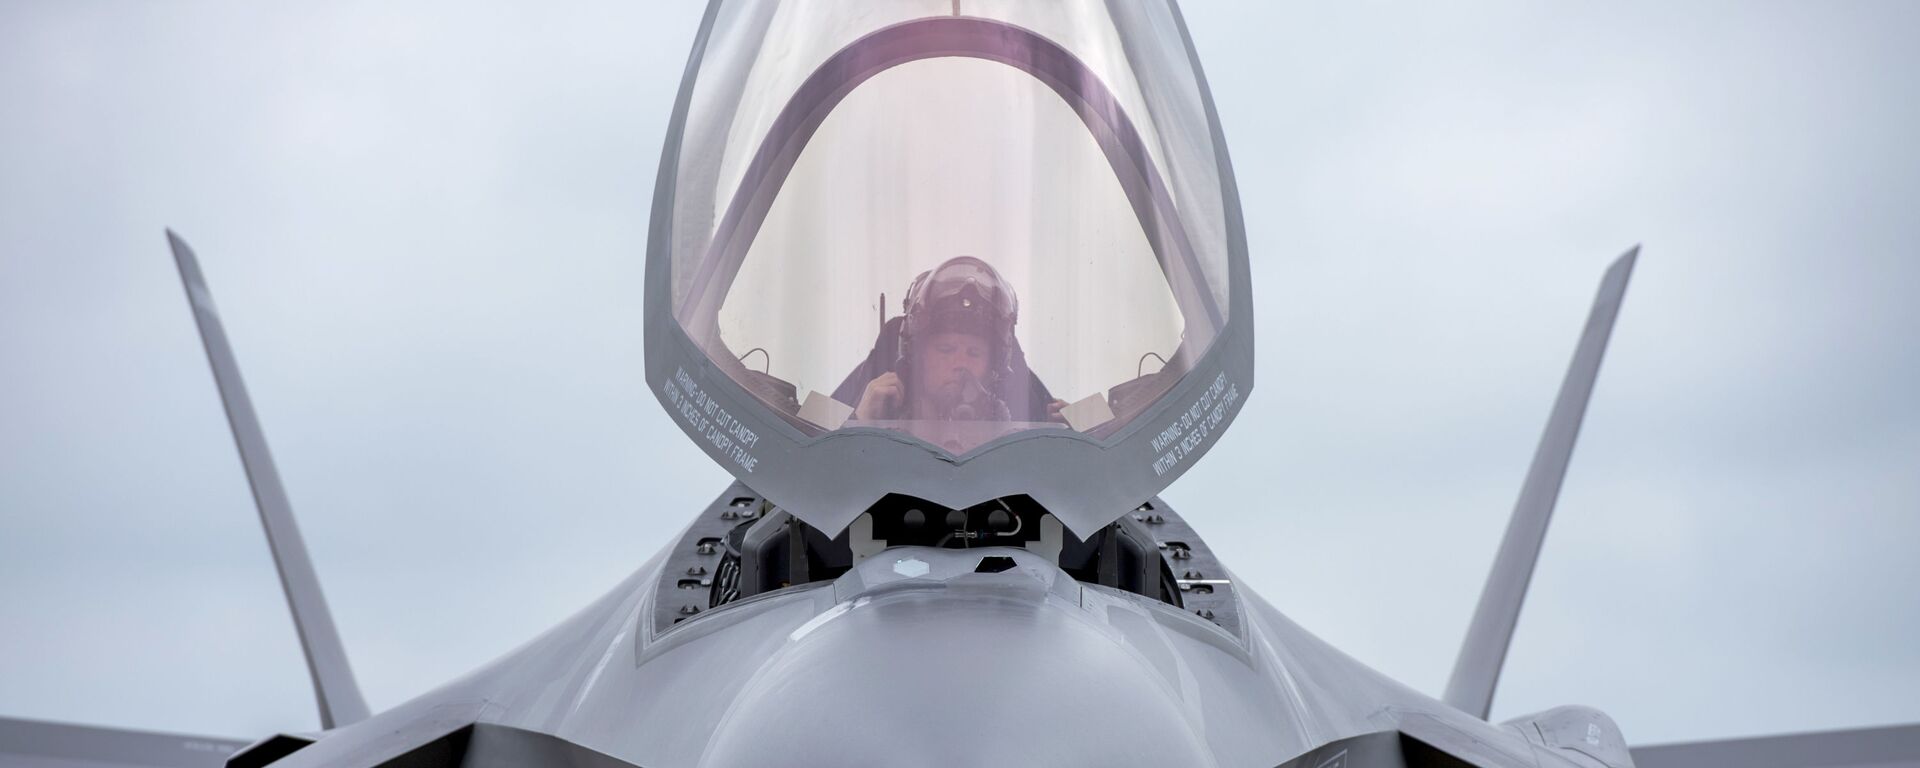 Maj. Will Andreotta, F-35 Lightning II Heritage Flight Team pilot from Luke Air Force Base, Az., prepares to exit the cockpit at Joint Base Andrews, Md., Sept. 20, 2016. The aircraft is here to perform a fly-over during the U.S. Air Force Tattoo at Joint Base Anacostia-Bolling, Washington, D.C., Sept. 22, 2016.  - Sputnik International, 1920, 24.03.2023